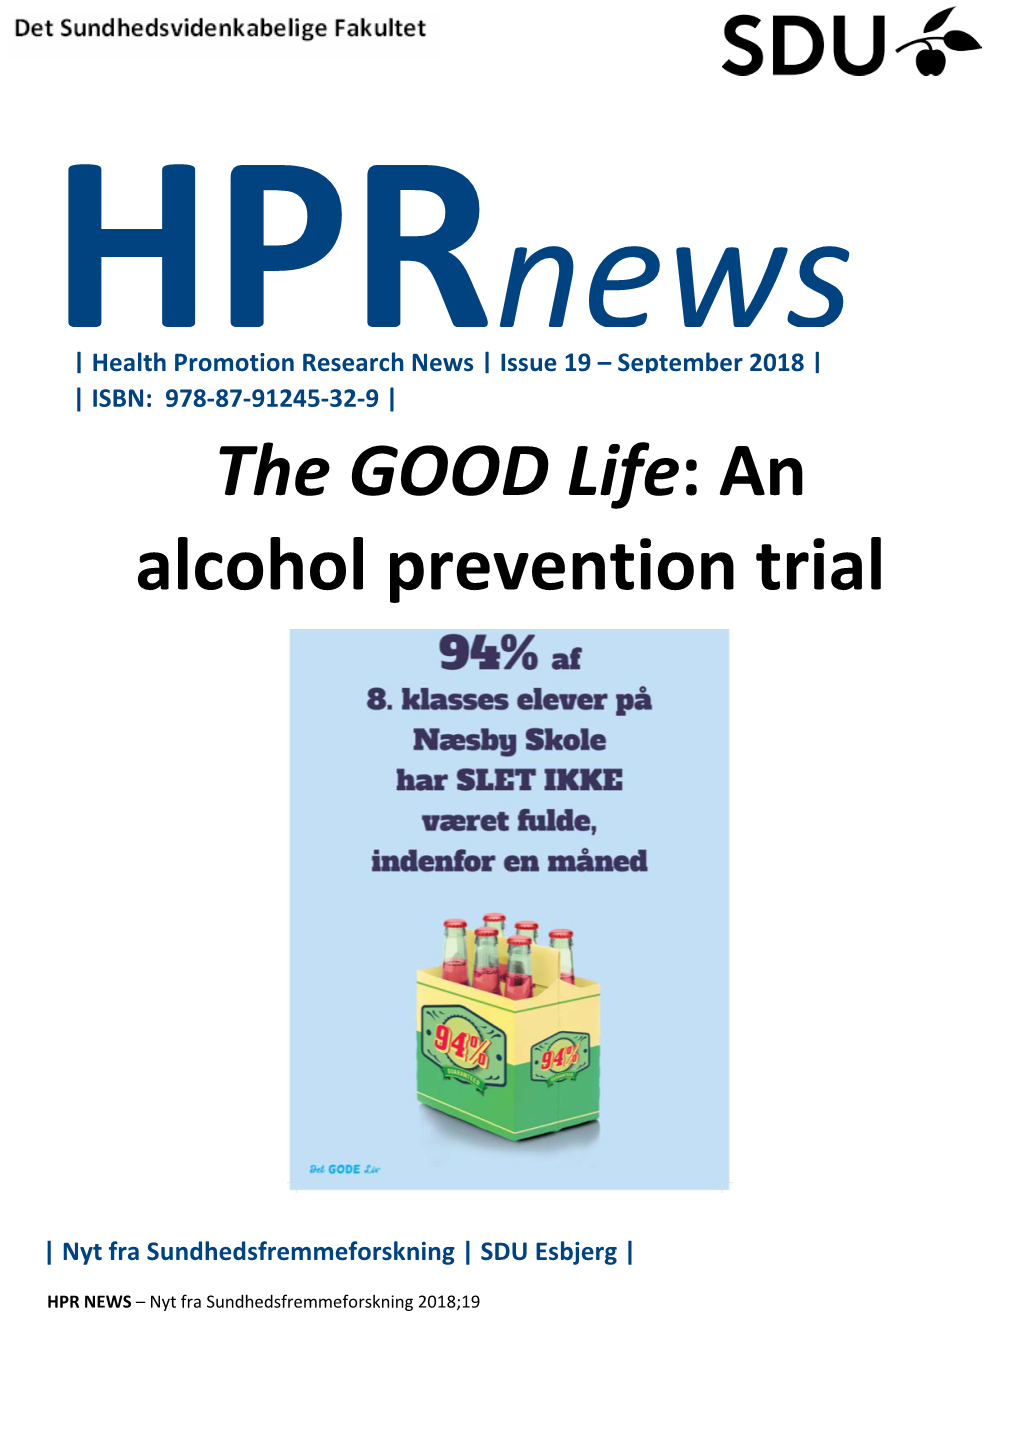 The GOOD Life: an Alcohol Prevention Trial